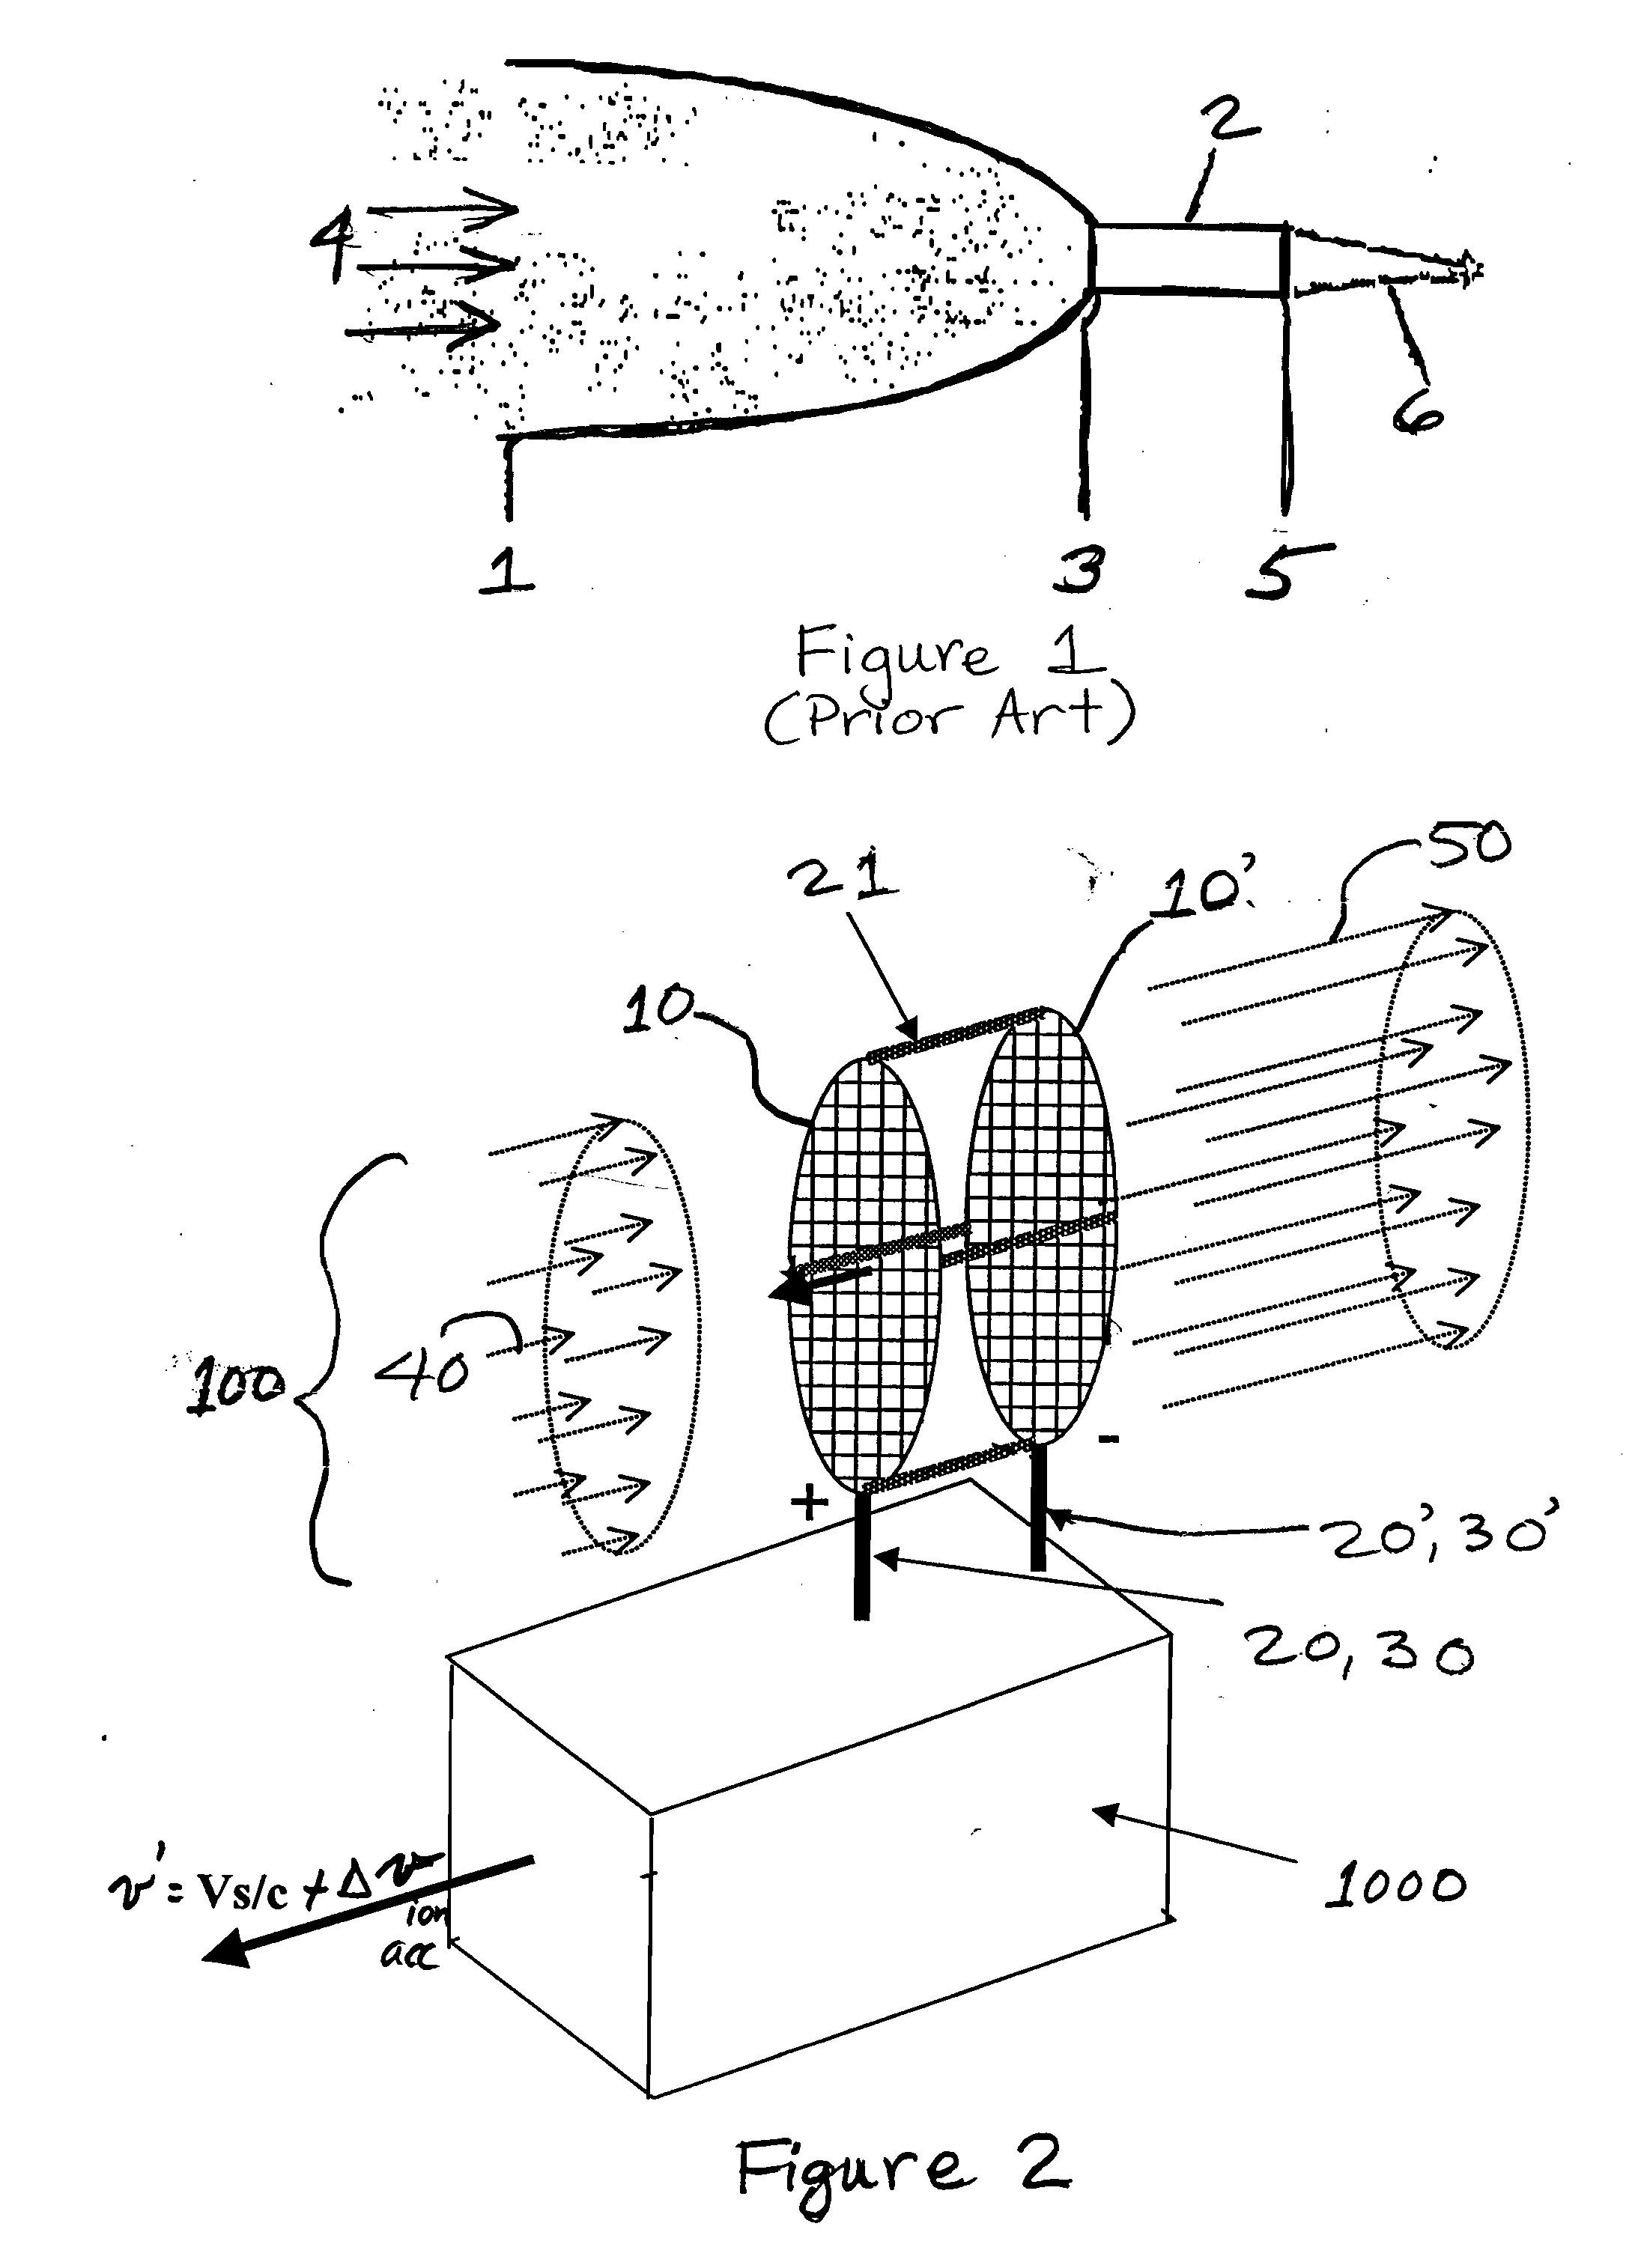 System and Method for an Ambient Atmosphere Ion Thruster